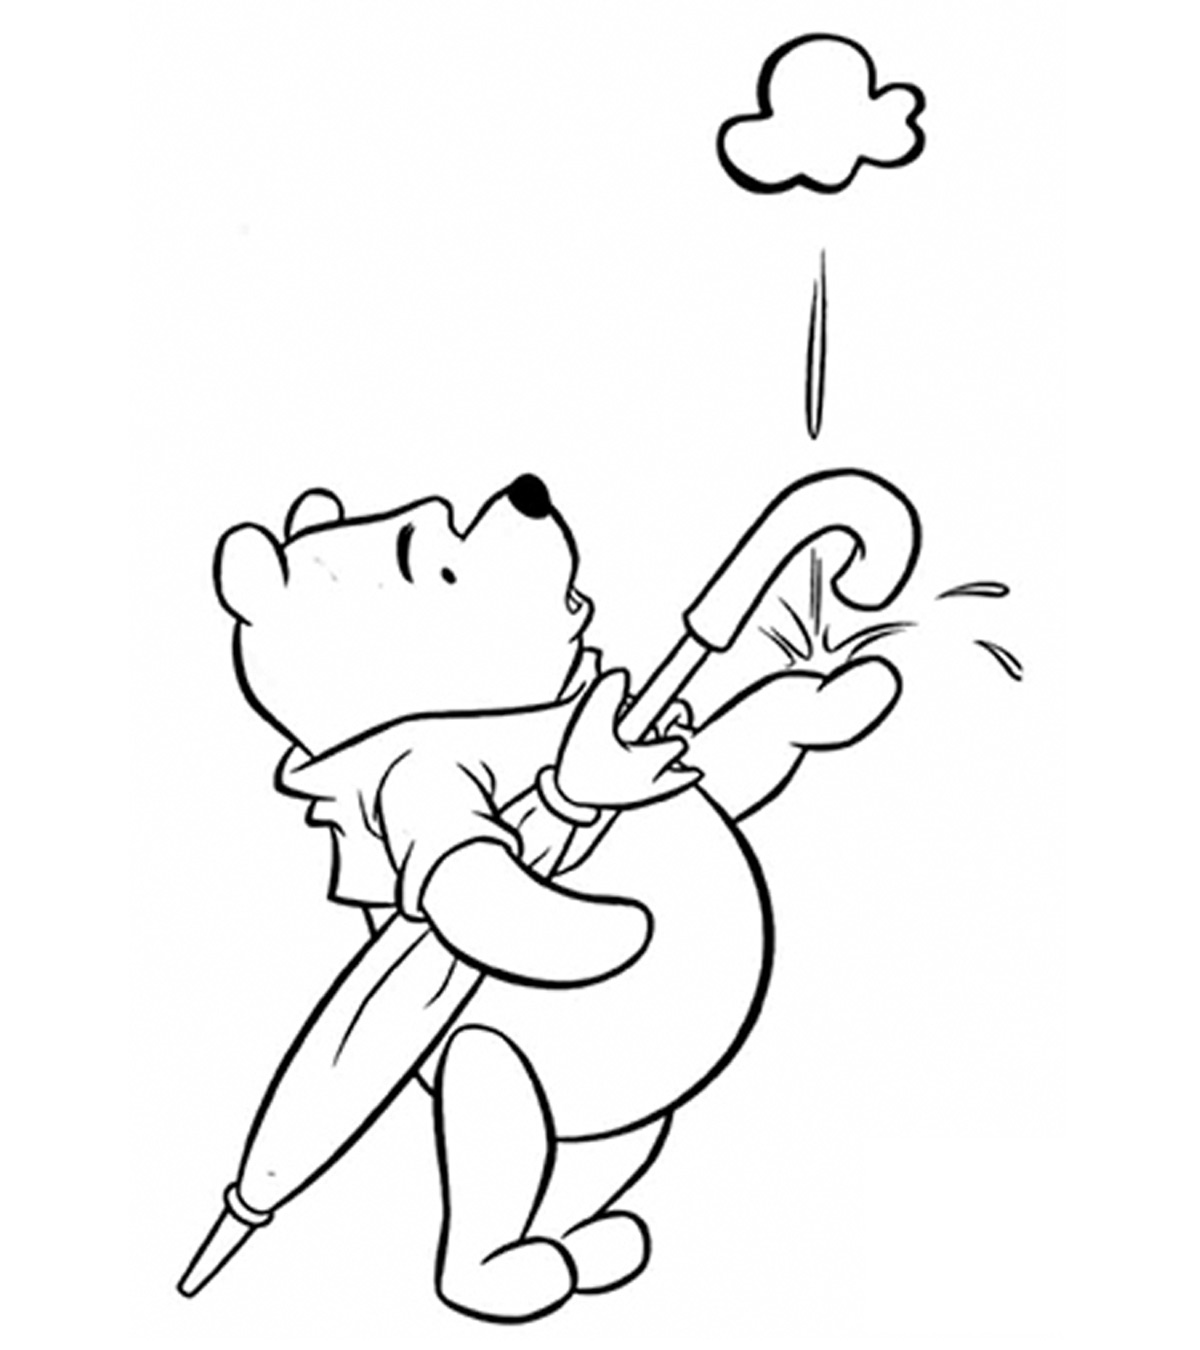 10 Cute Pooh Bear Coloring Pages For Your Little Ones_image